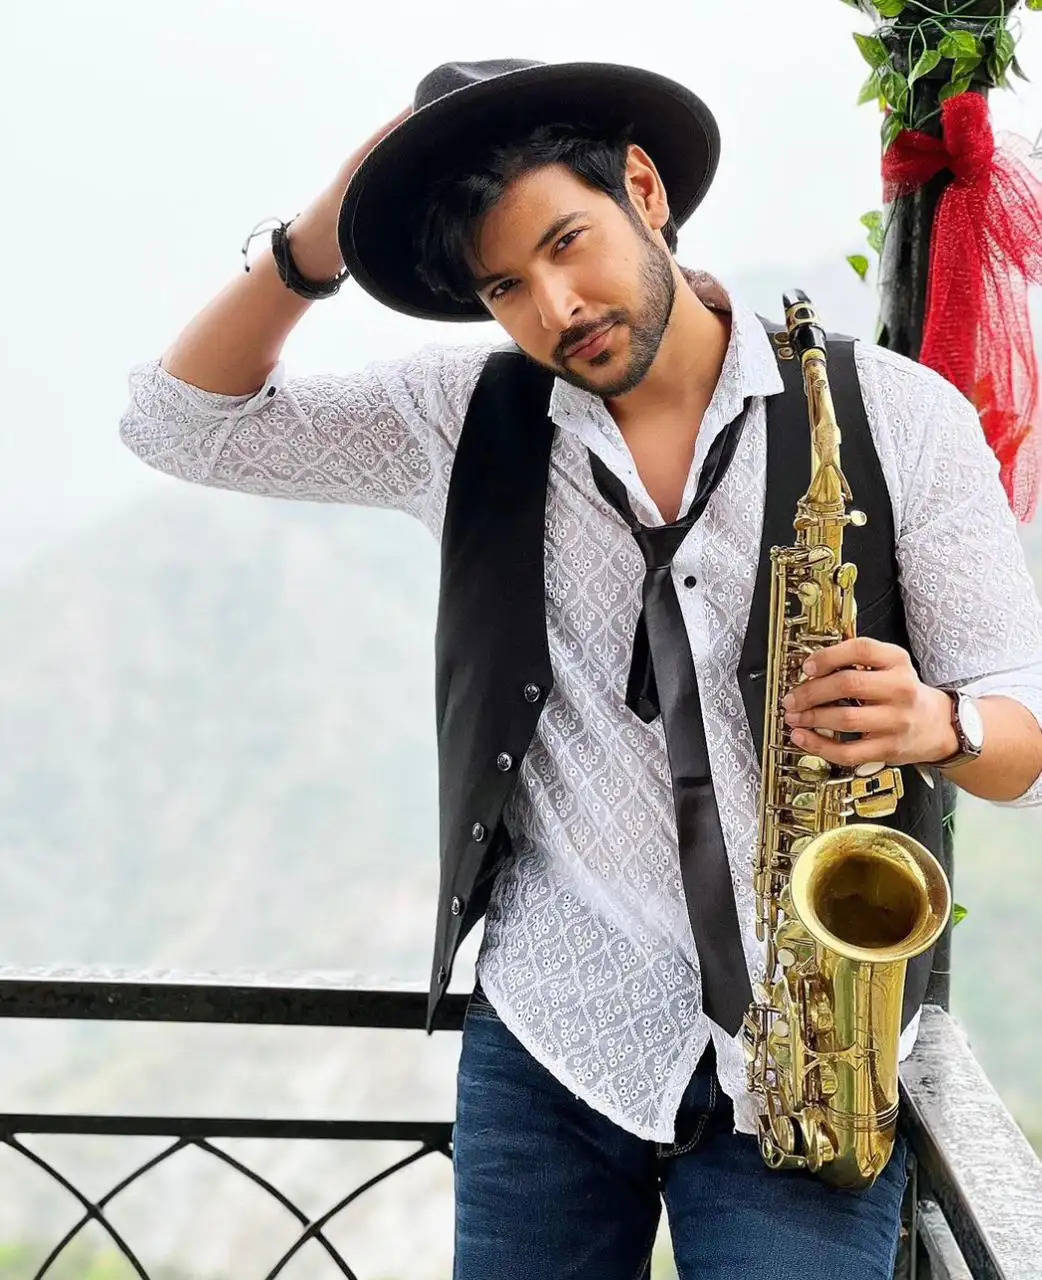 Aakhri Sach actor Shivin Narang’s new music video is a delight for the audience